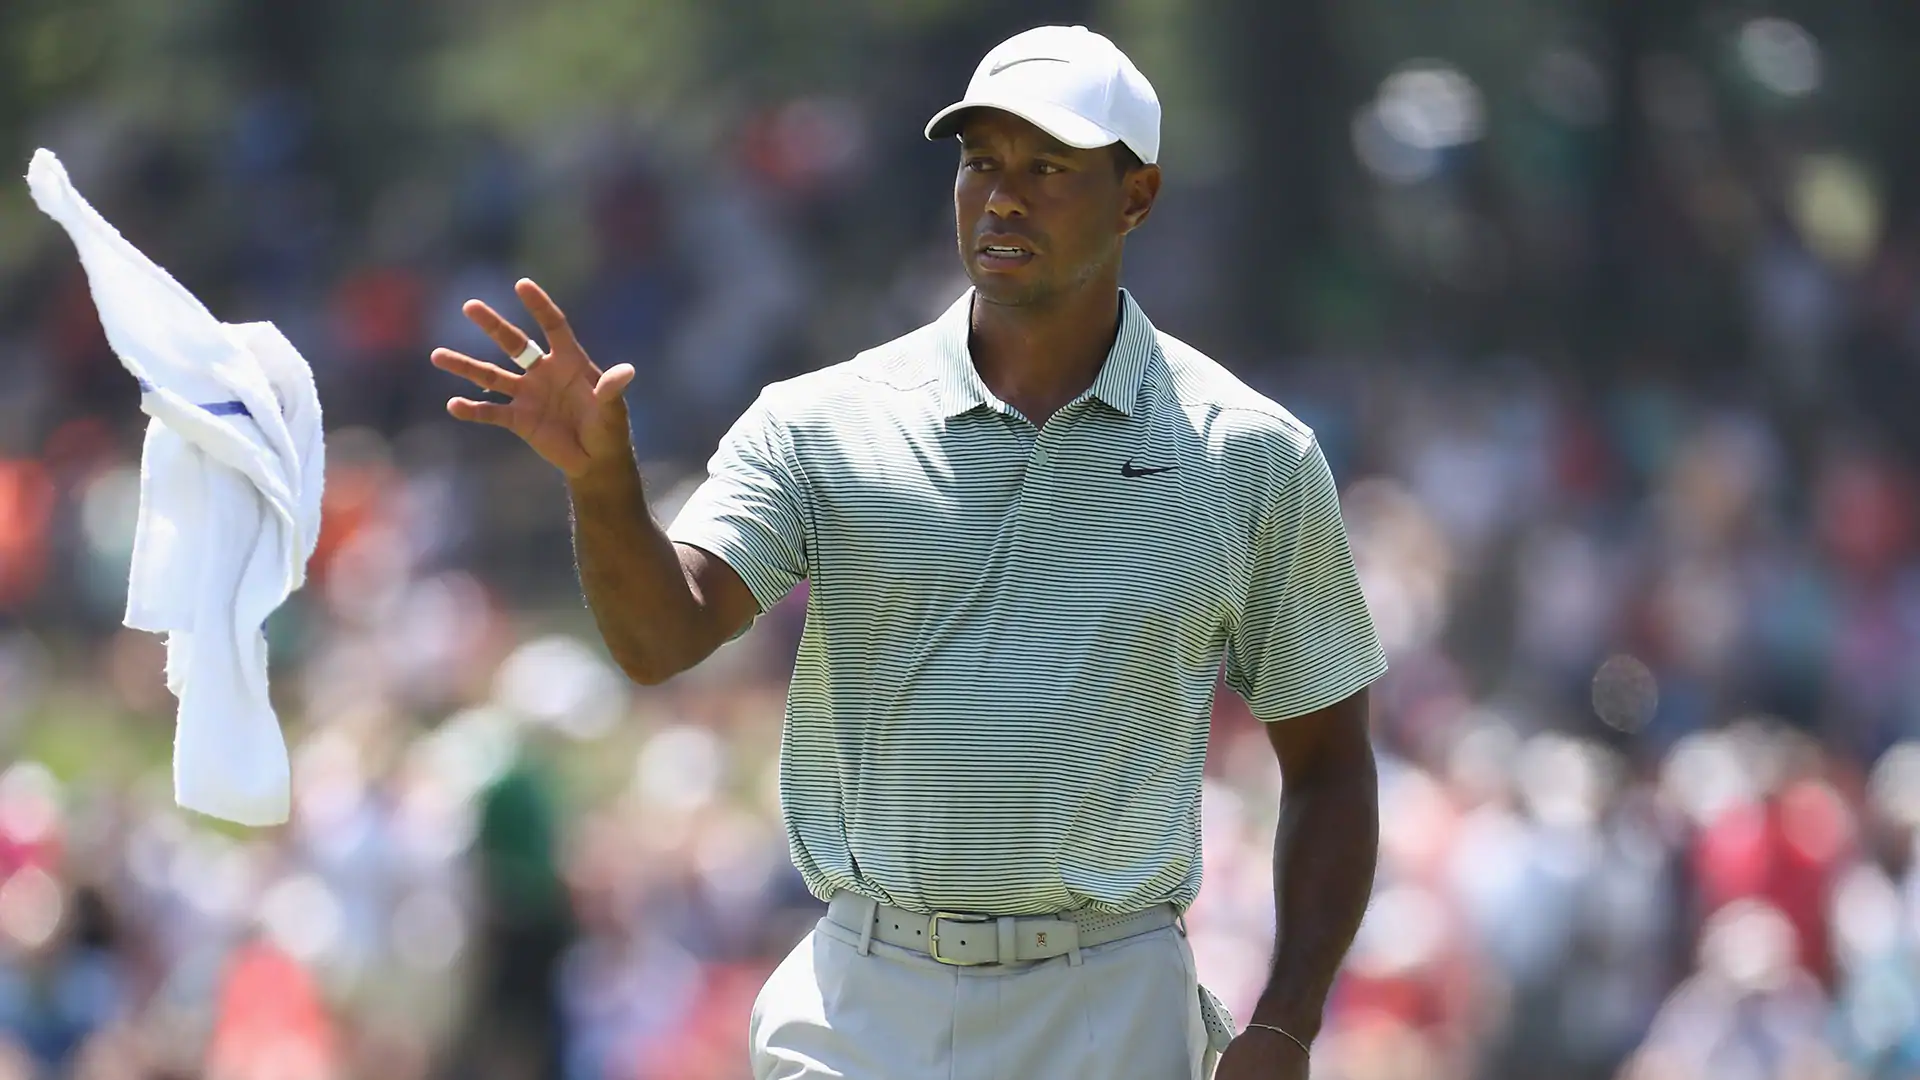 Hot in here: Woods wears 3 different shirts Saturday